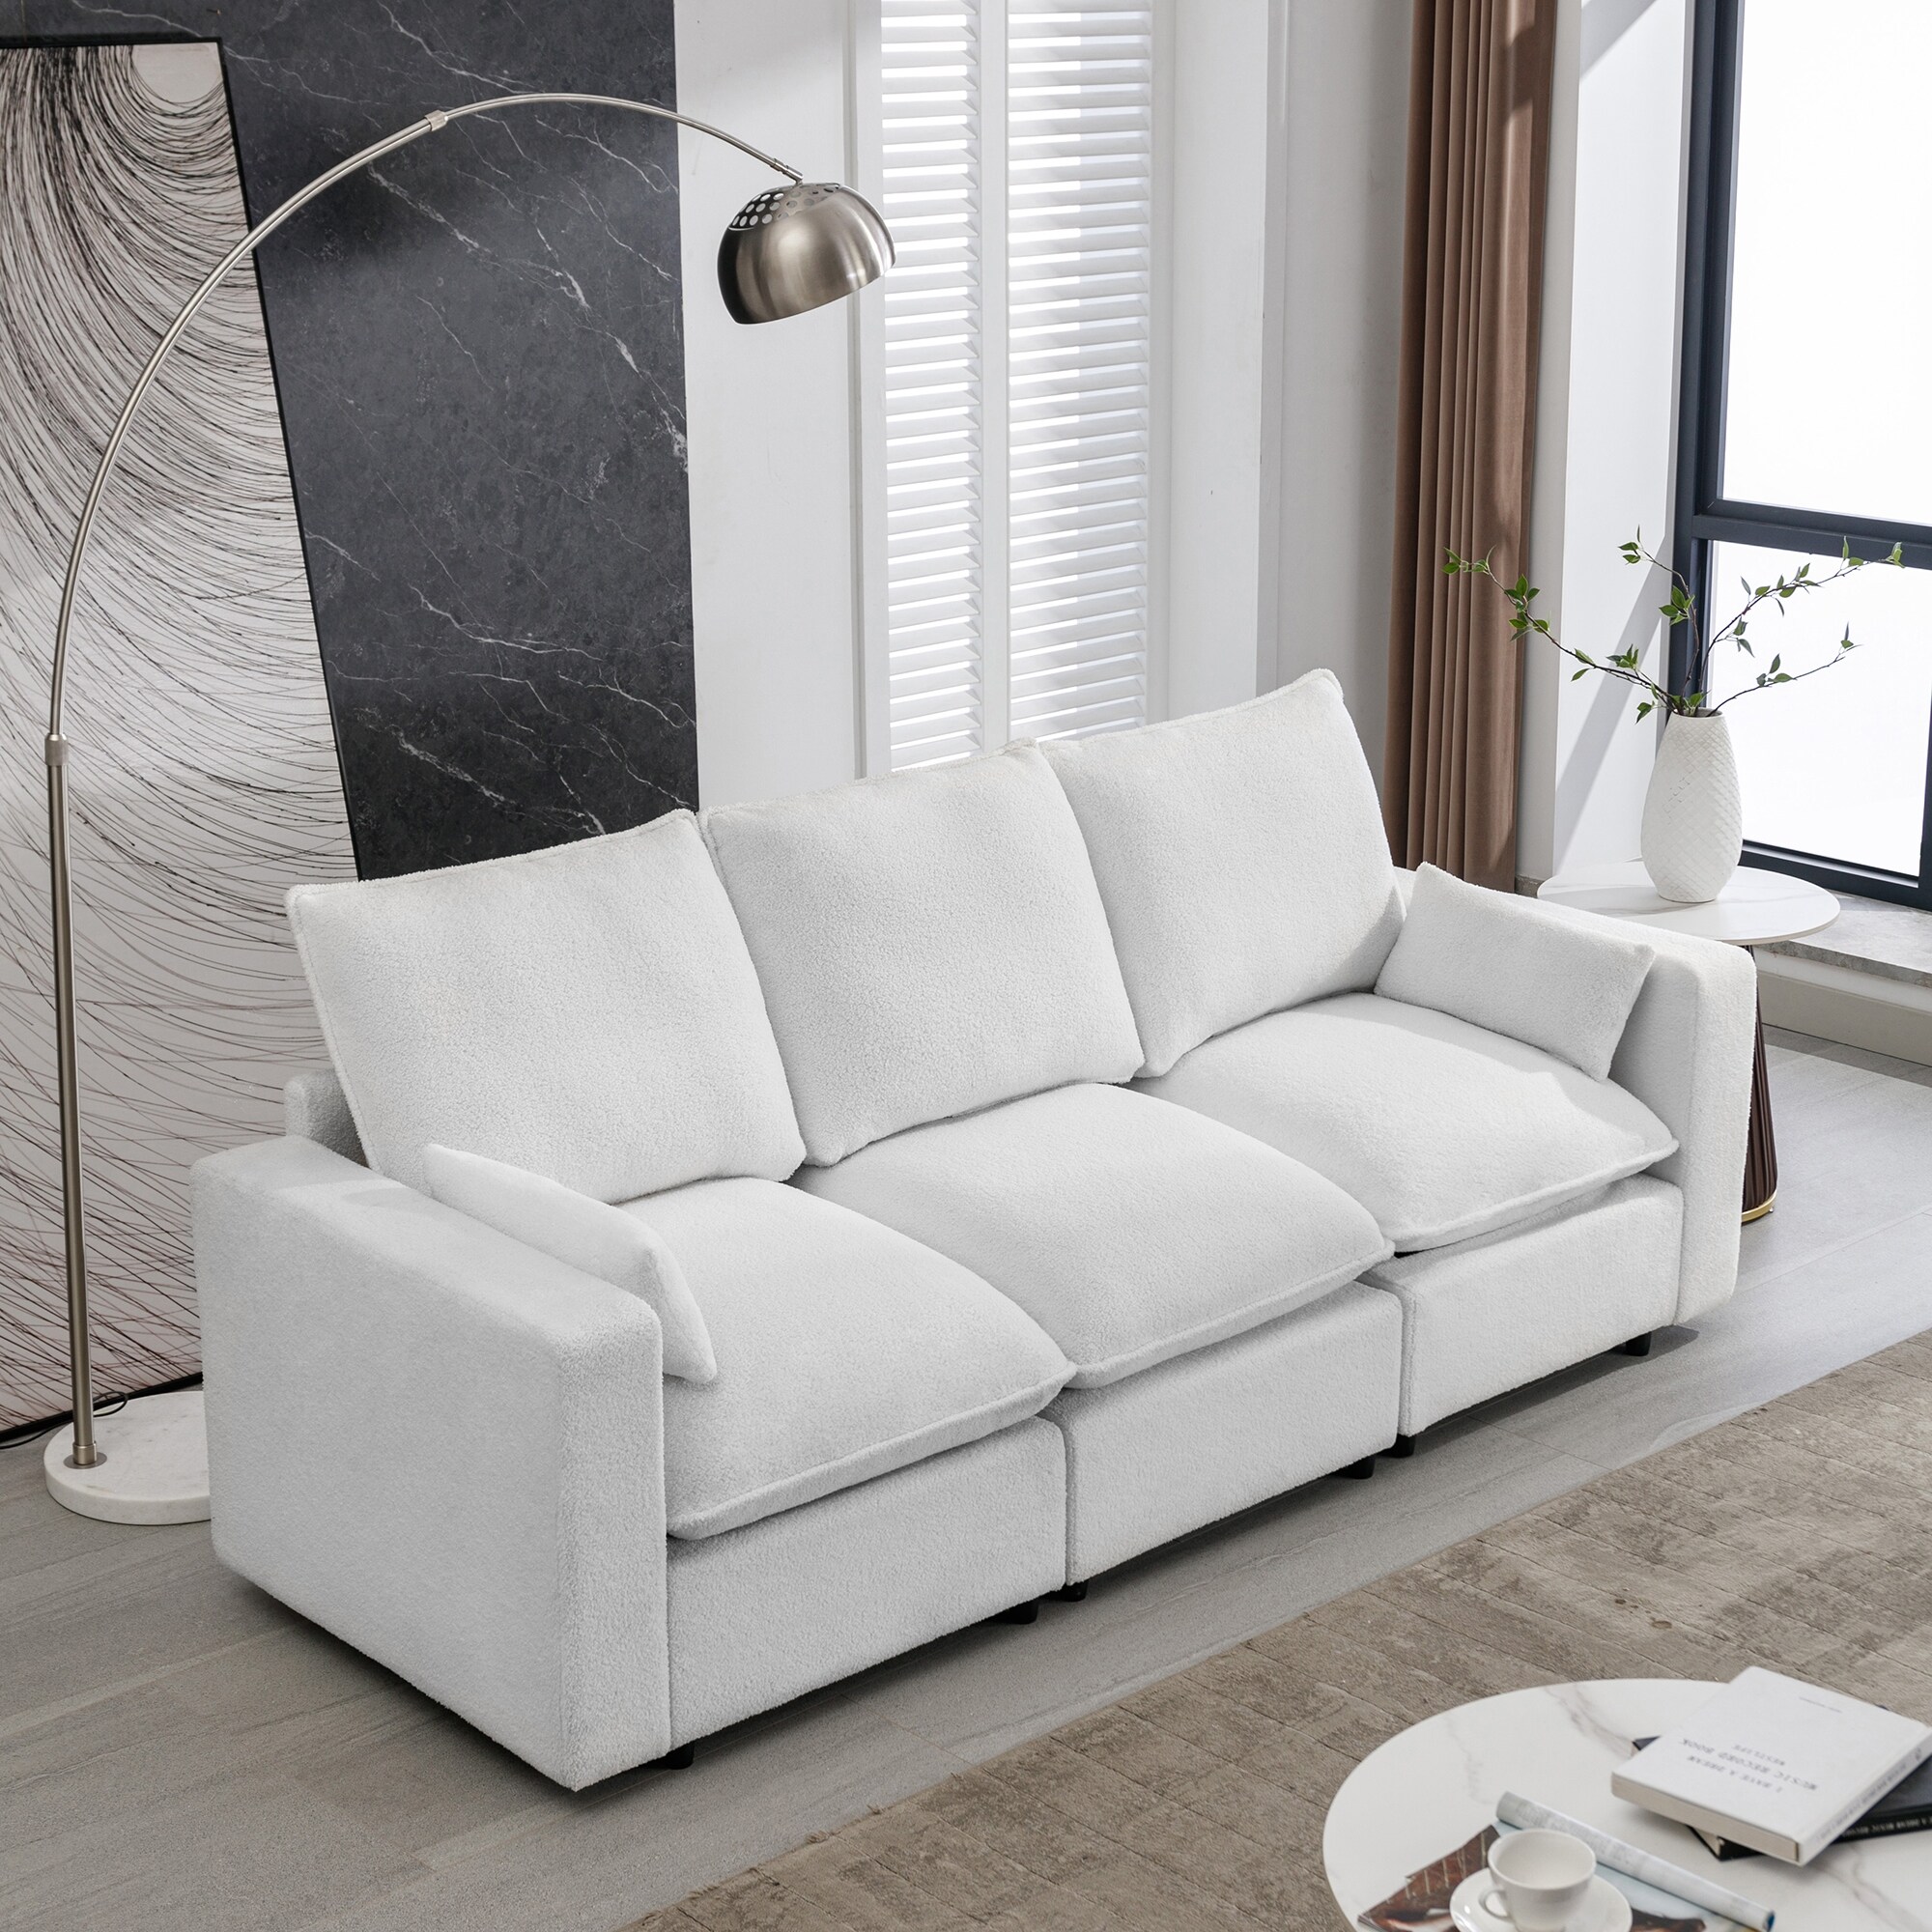 https://ak1.ostkcdn.com/images/products/is/images/direct/5f7e5fb0409c1f88d11ab04e6af6152c383fd1c3/3-Seat-Teddy-Fabric-Sofa-Removable-Seat-Cushion-Couch-w--Throw-Pillows.jpg